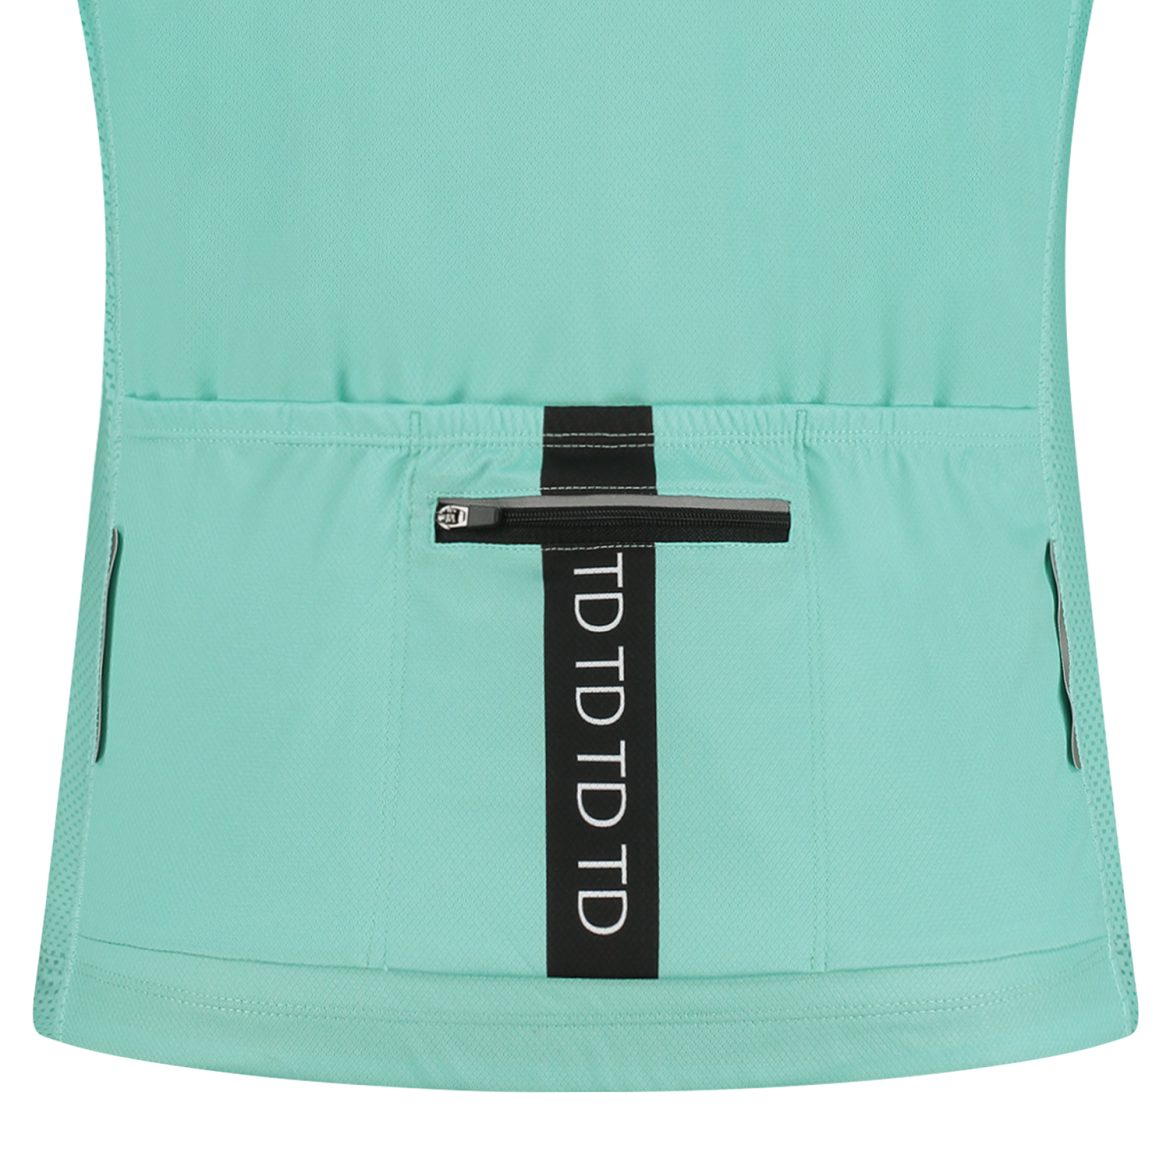 Ladies celeste rear cycling shirt details 3 back pockets from TD